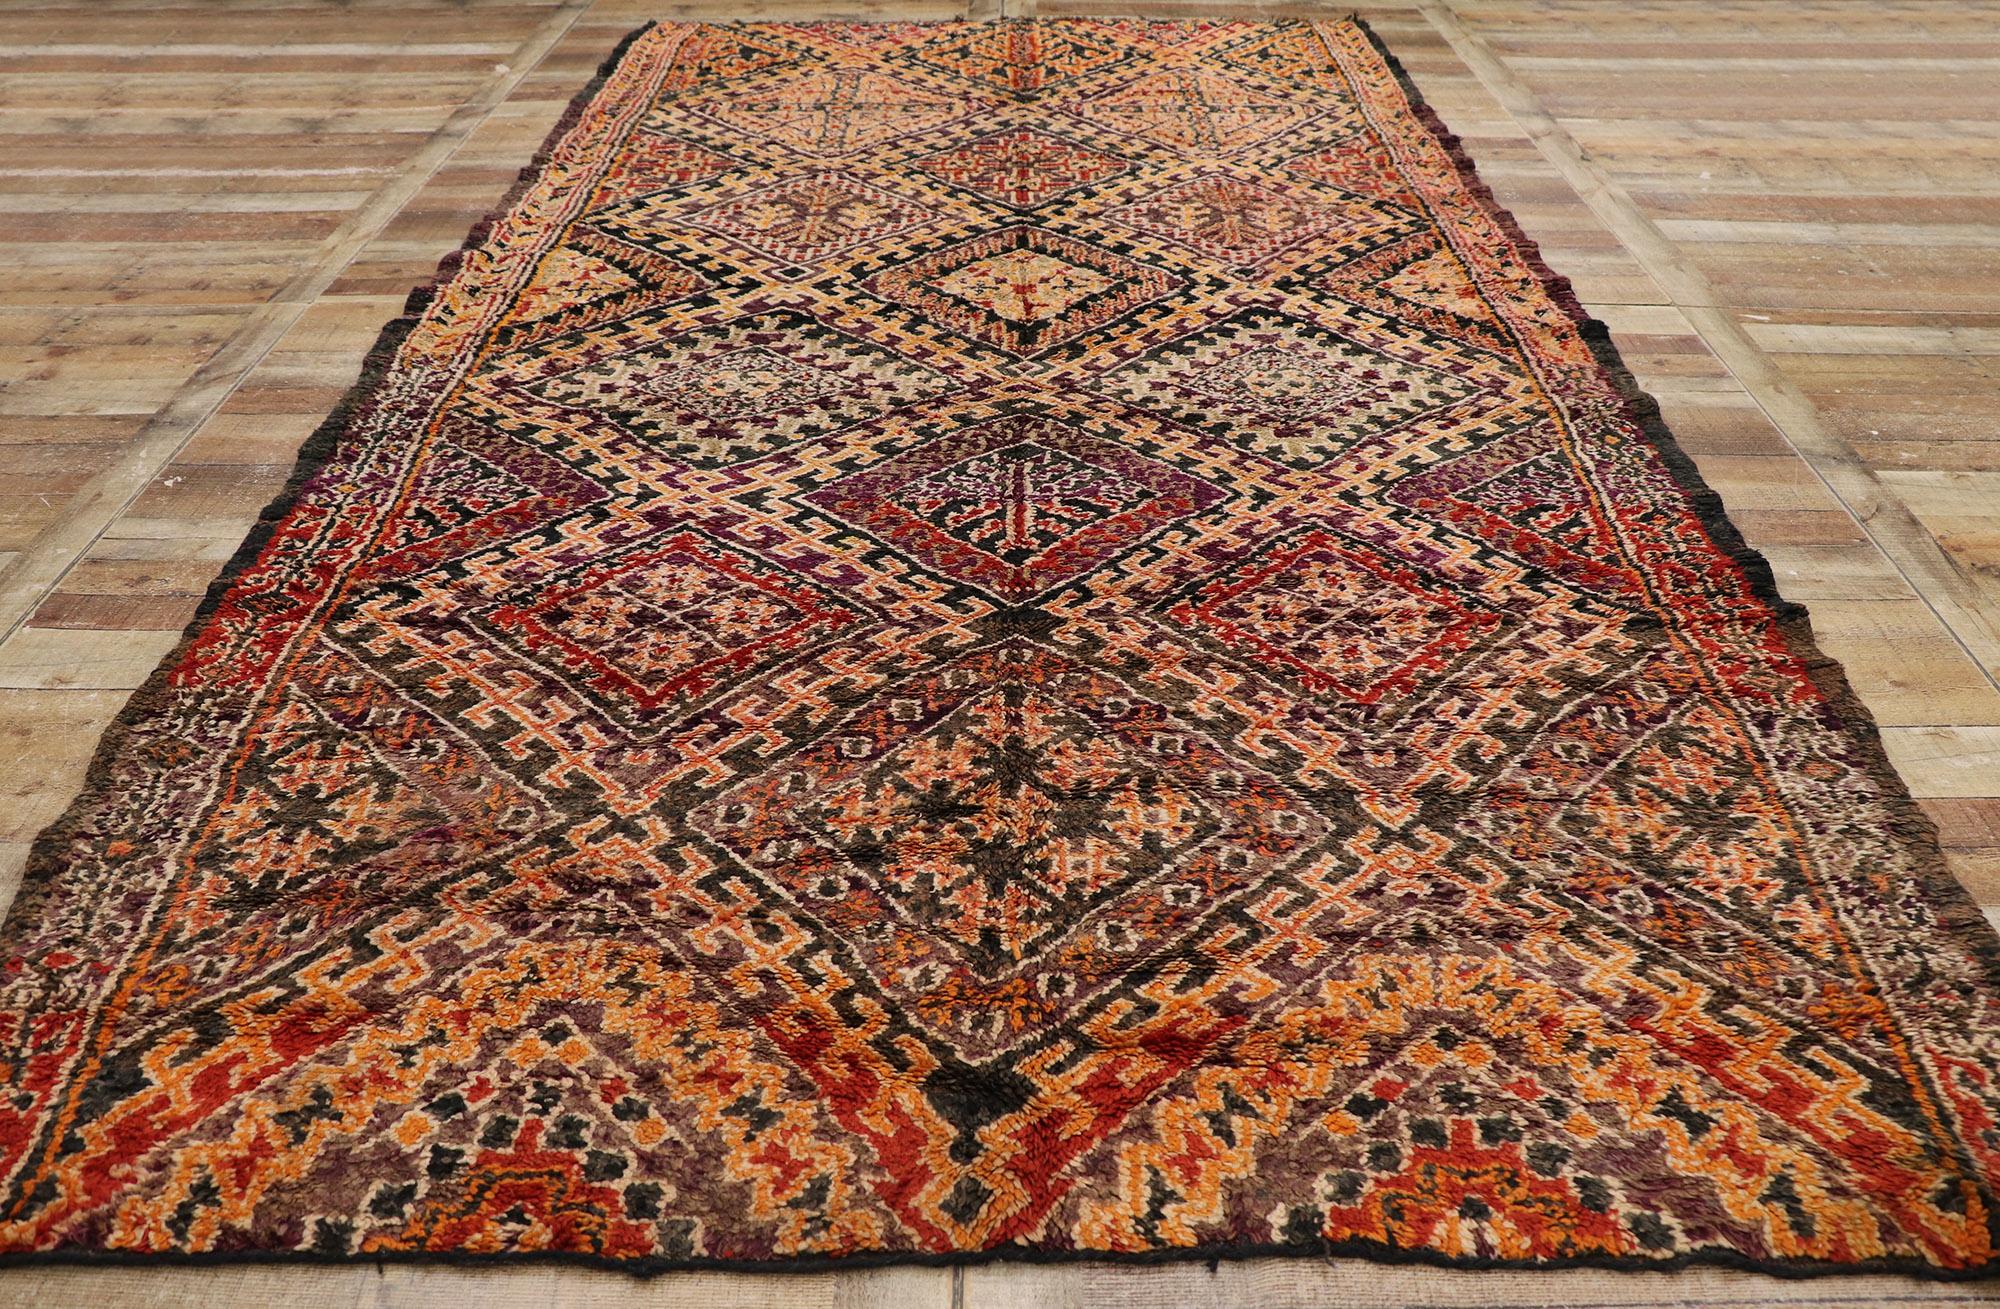 Wool Vintage Berber Beni M'Guild Moroccan Rug with Mid-Century Modern Style For Sale